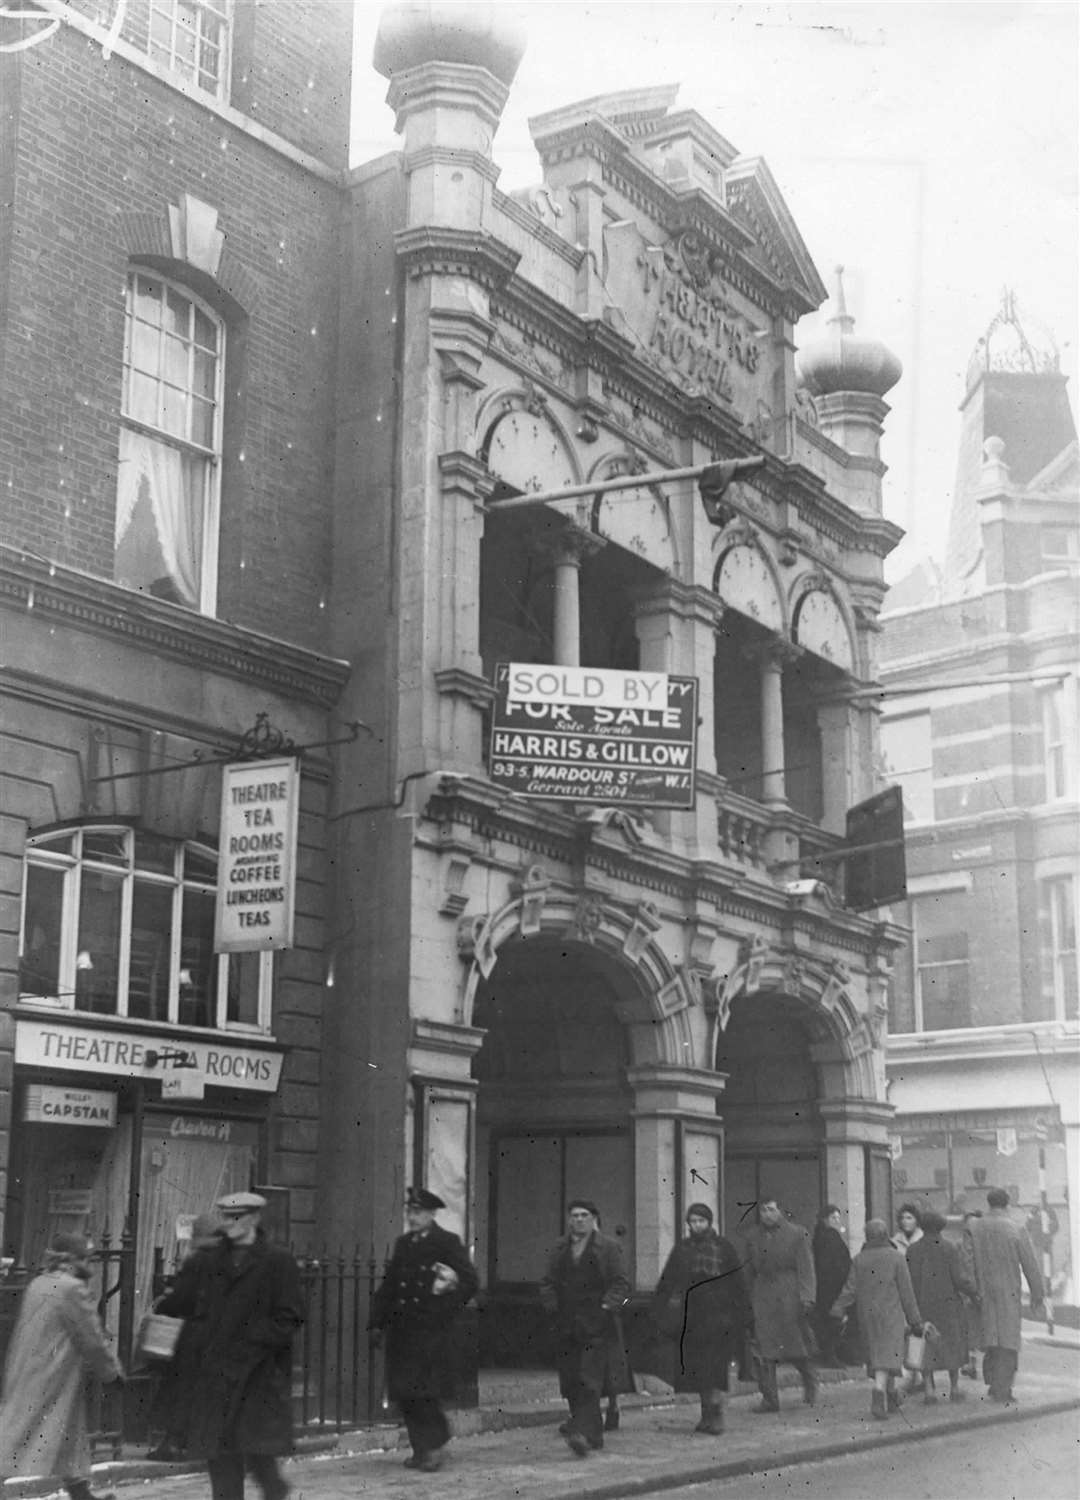 In its heyday during the early 20th century, the Theatre Royal would host up to 3,000 people every night